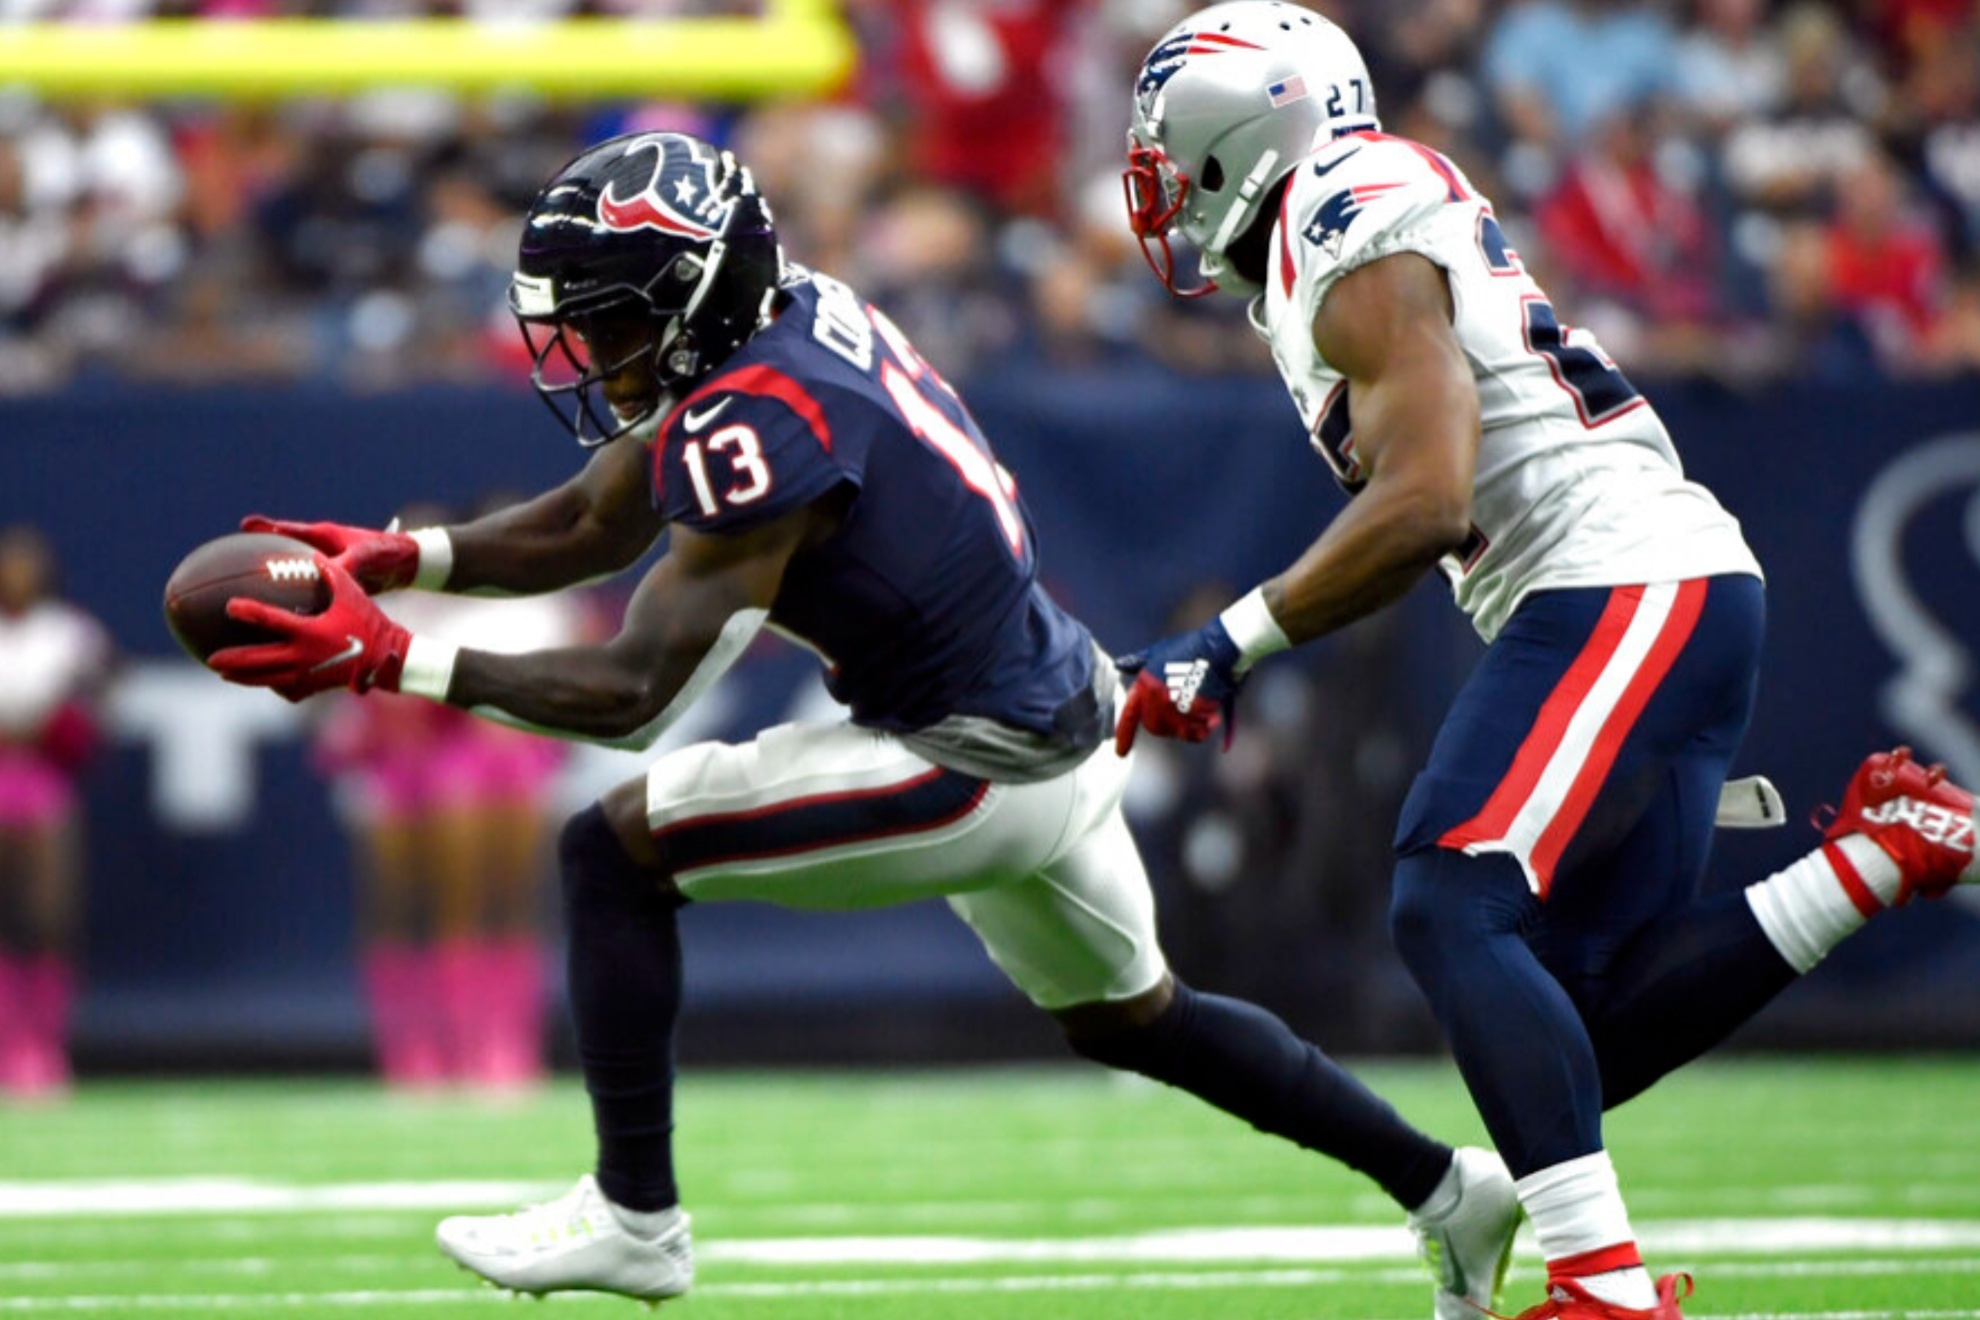 The Texans and the Patriots will play in the first game of Week 1 of the NFL preseason